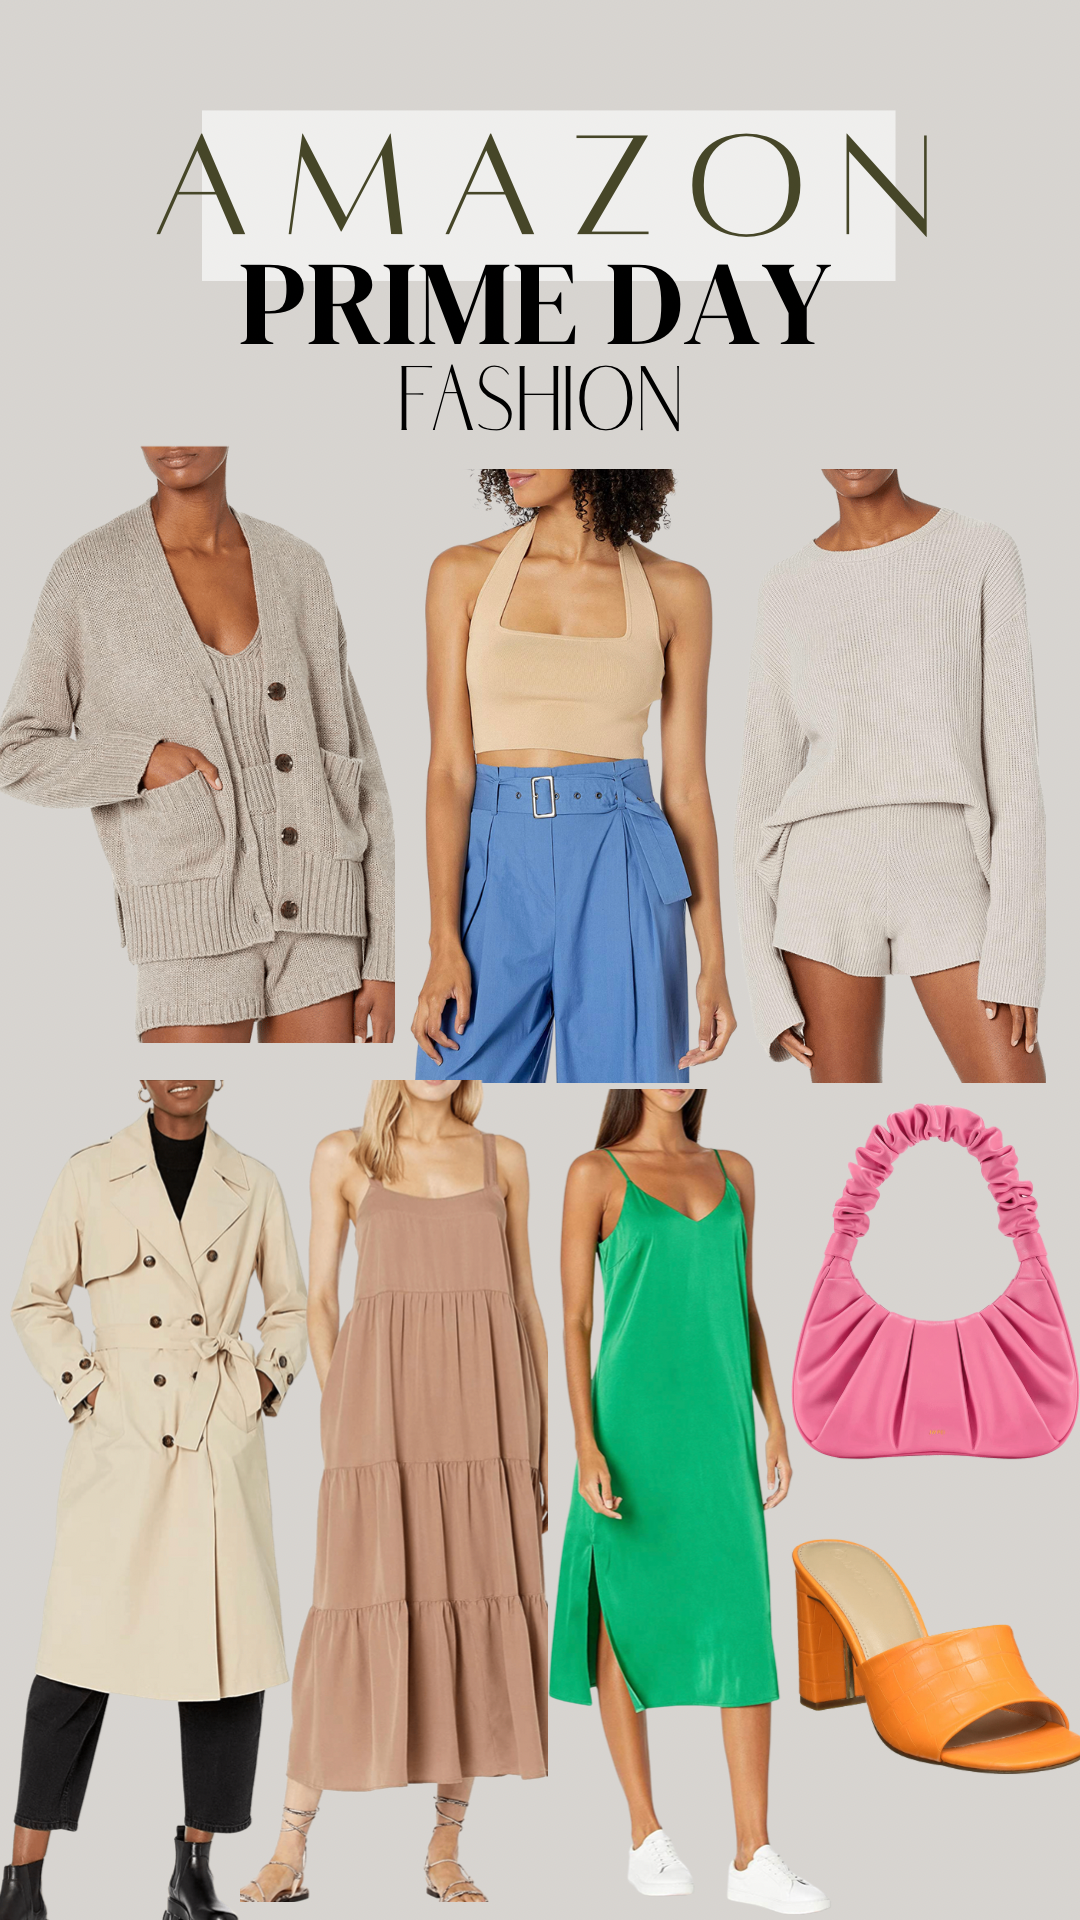 AMAZON PRIME DAY DEALS-Jaclyn De Leon Style. Round up of all my favorite deals for Amazon Prime Day 2022. Fashion, beauty, home + electronics.